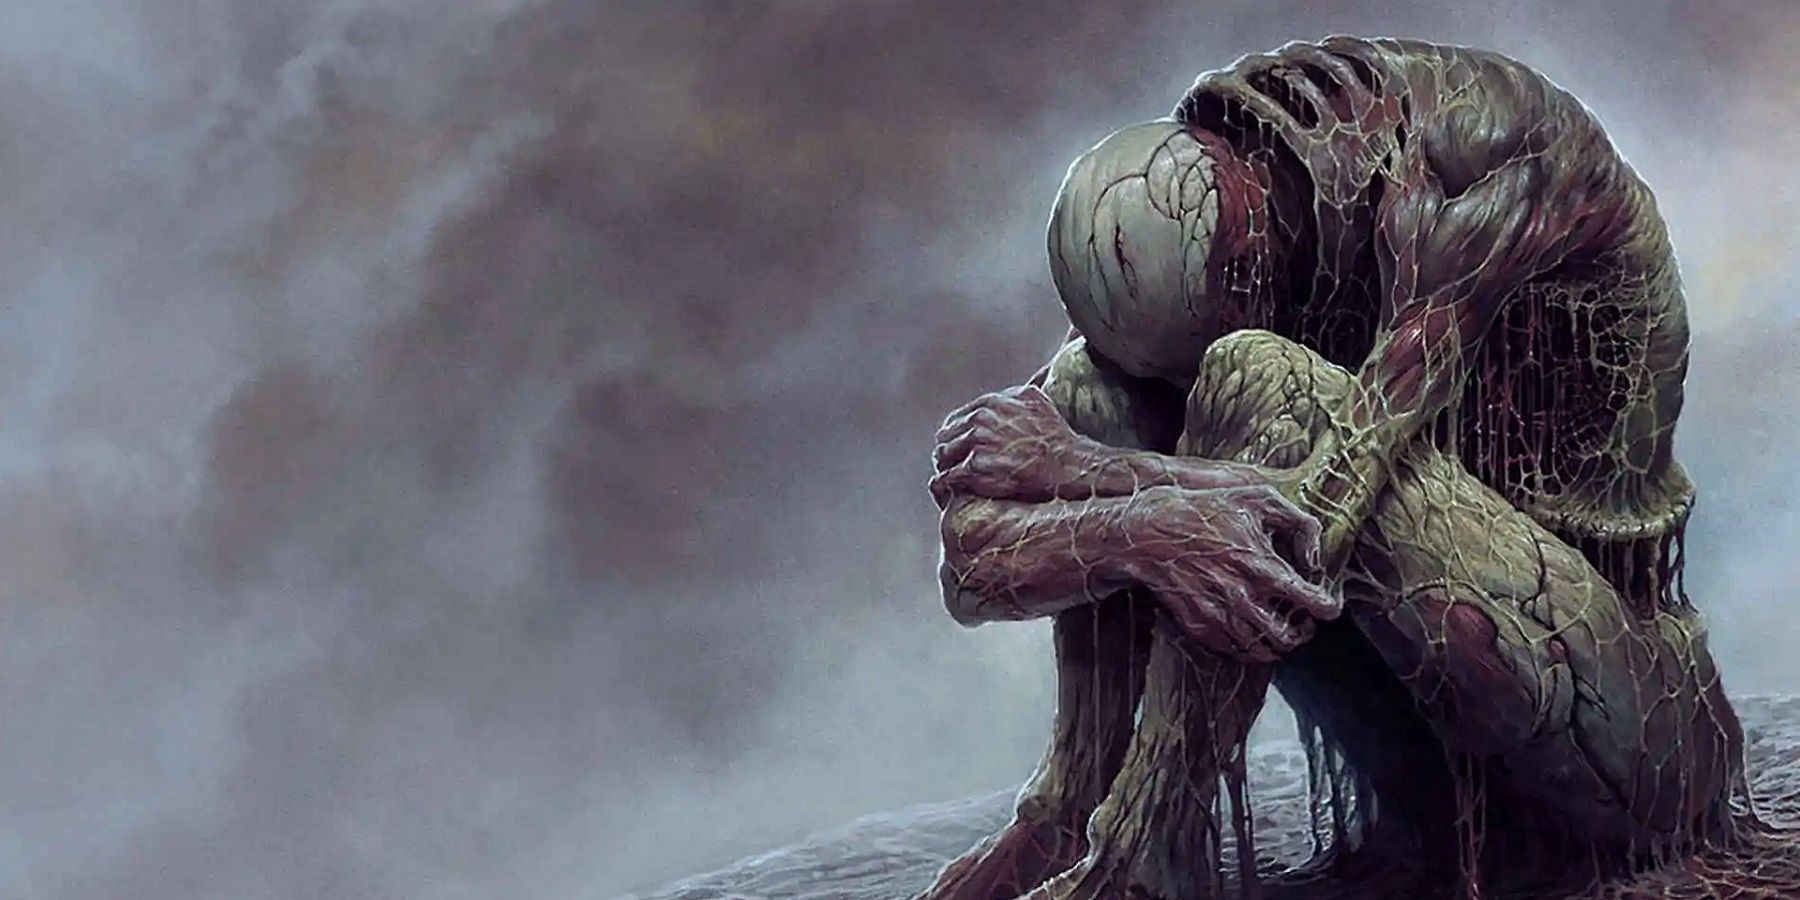 Concept art from horror game Scorn showing a humanoid figure sat on the floor, muscles exposed.